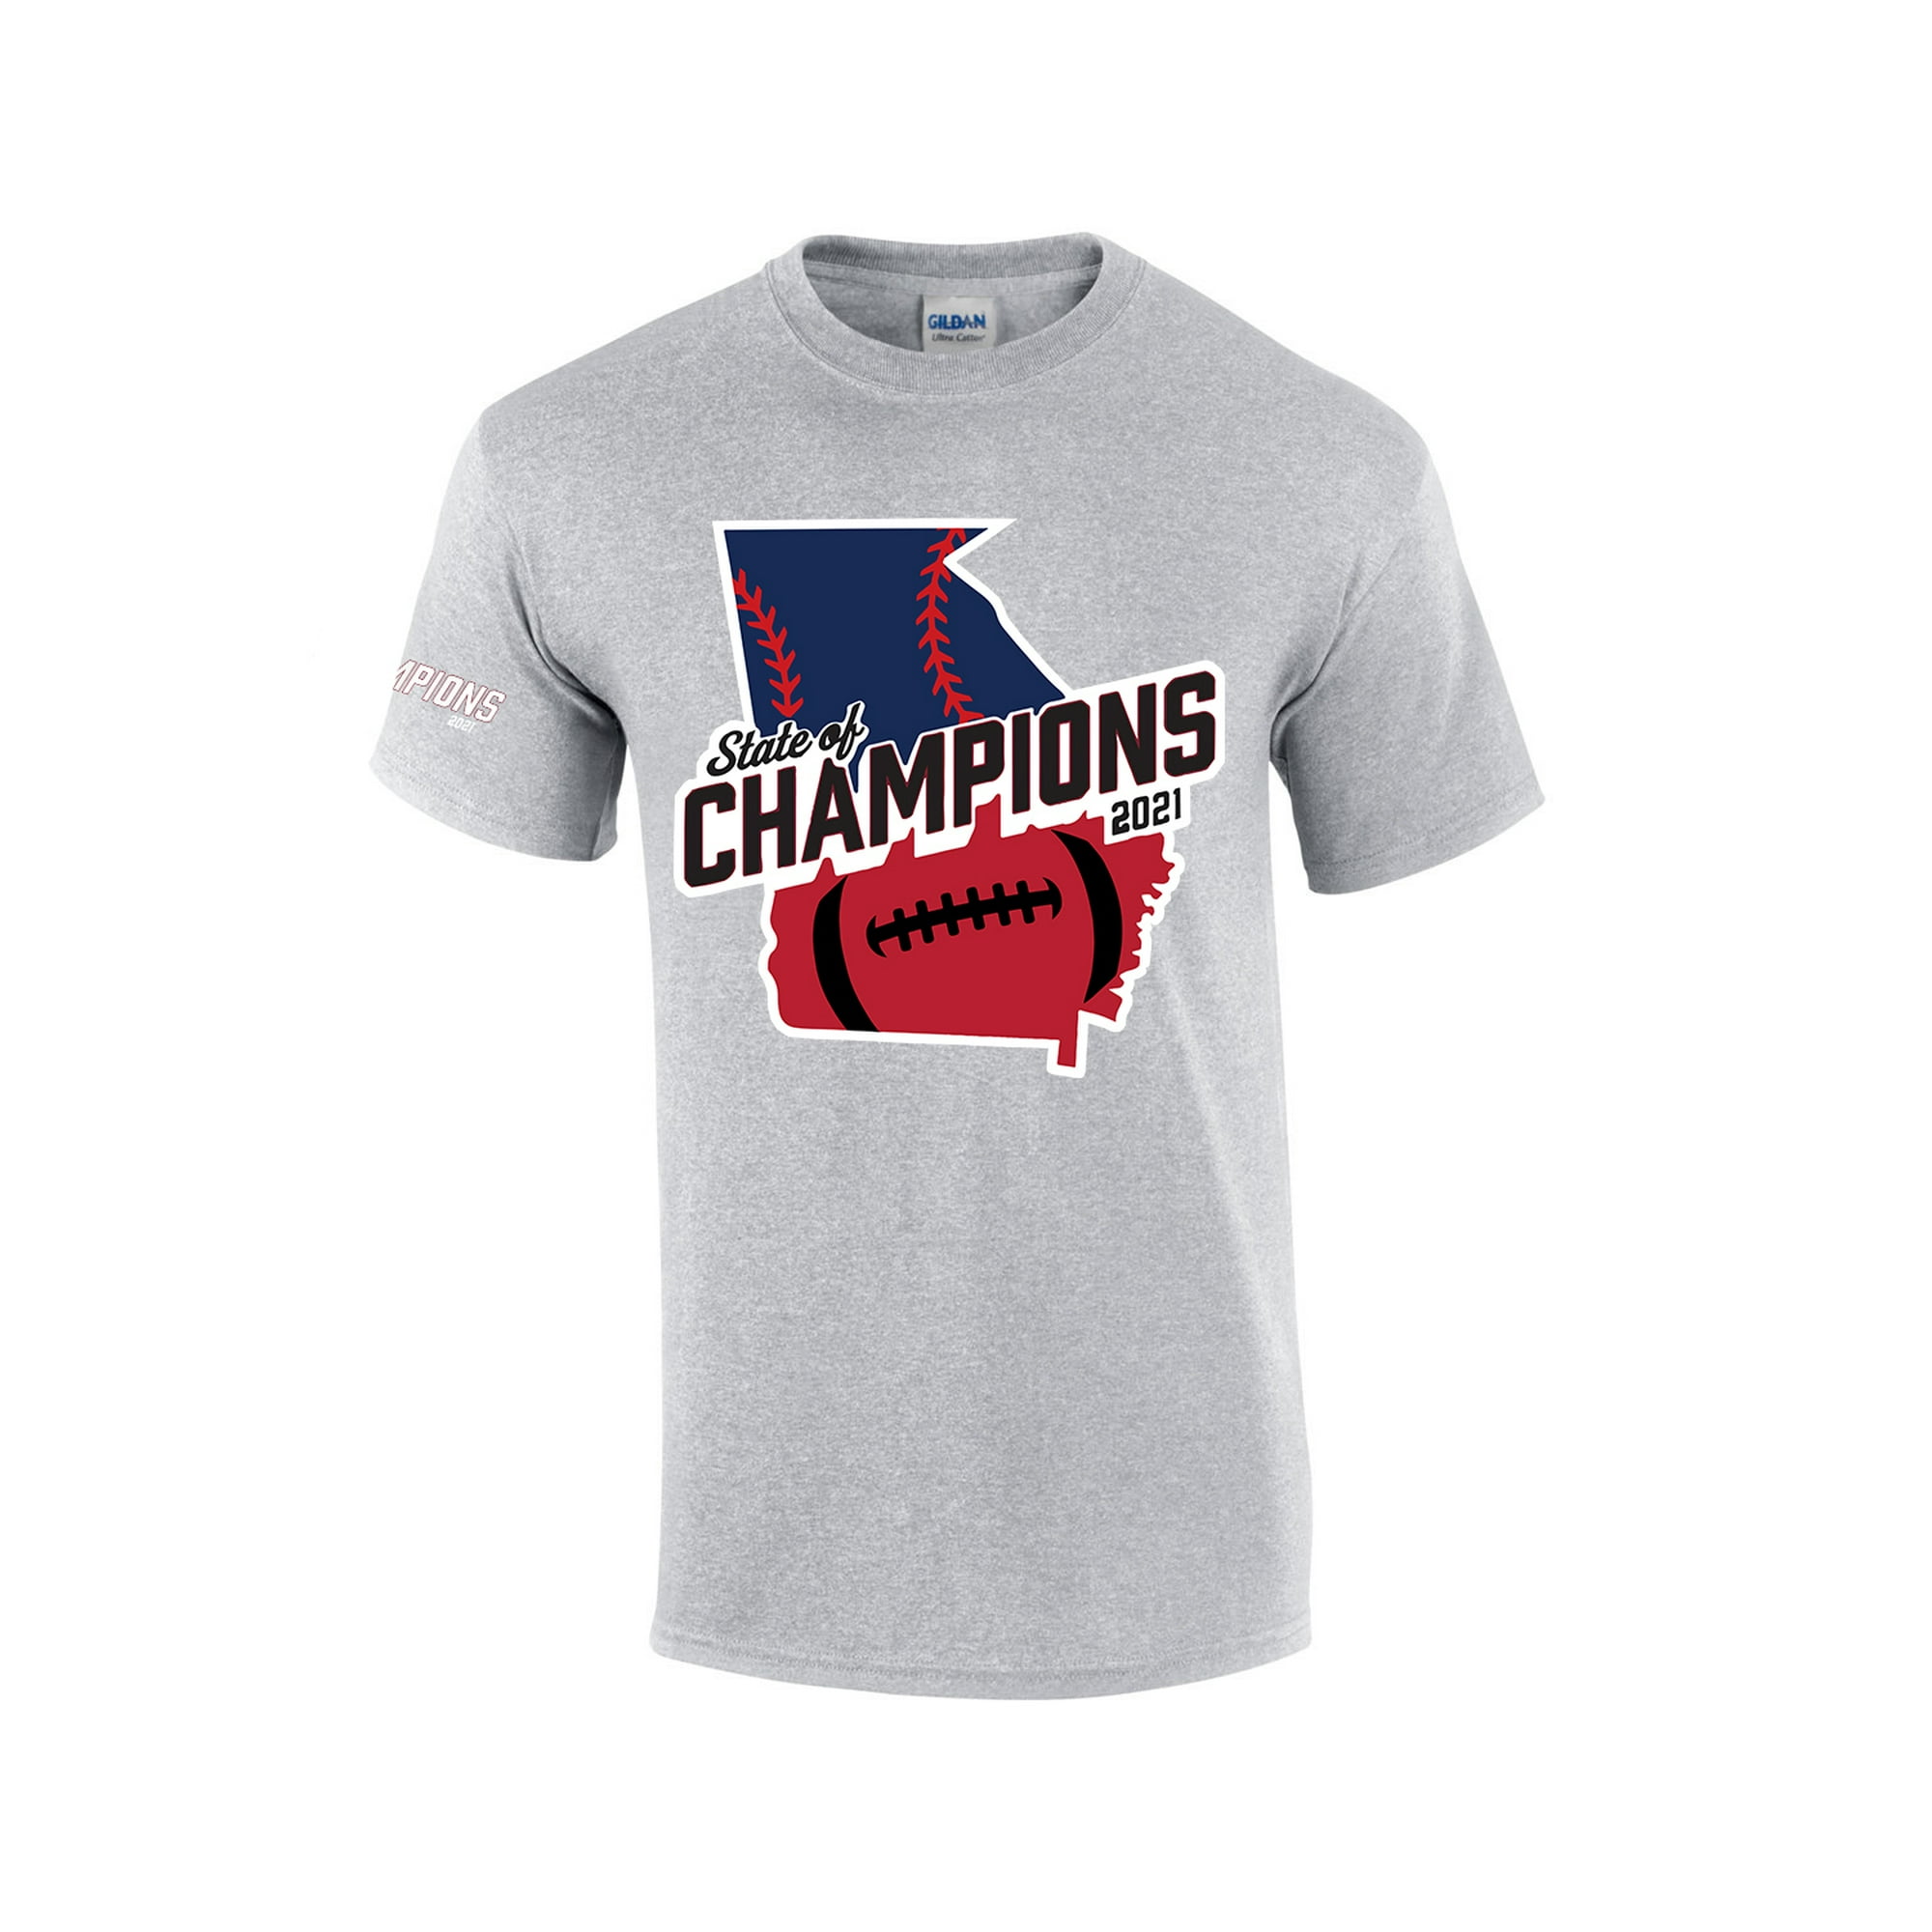 Georgia the State of Champions Baseball Football National Sports Champs  T-shirt Graphic Tee-Sports Grey-xl 